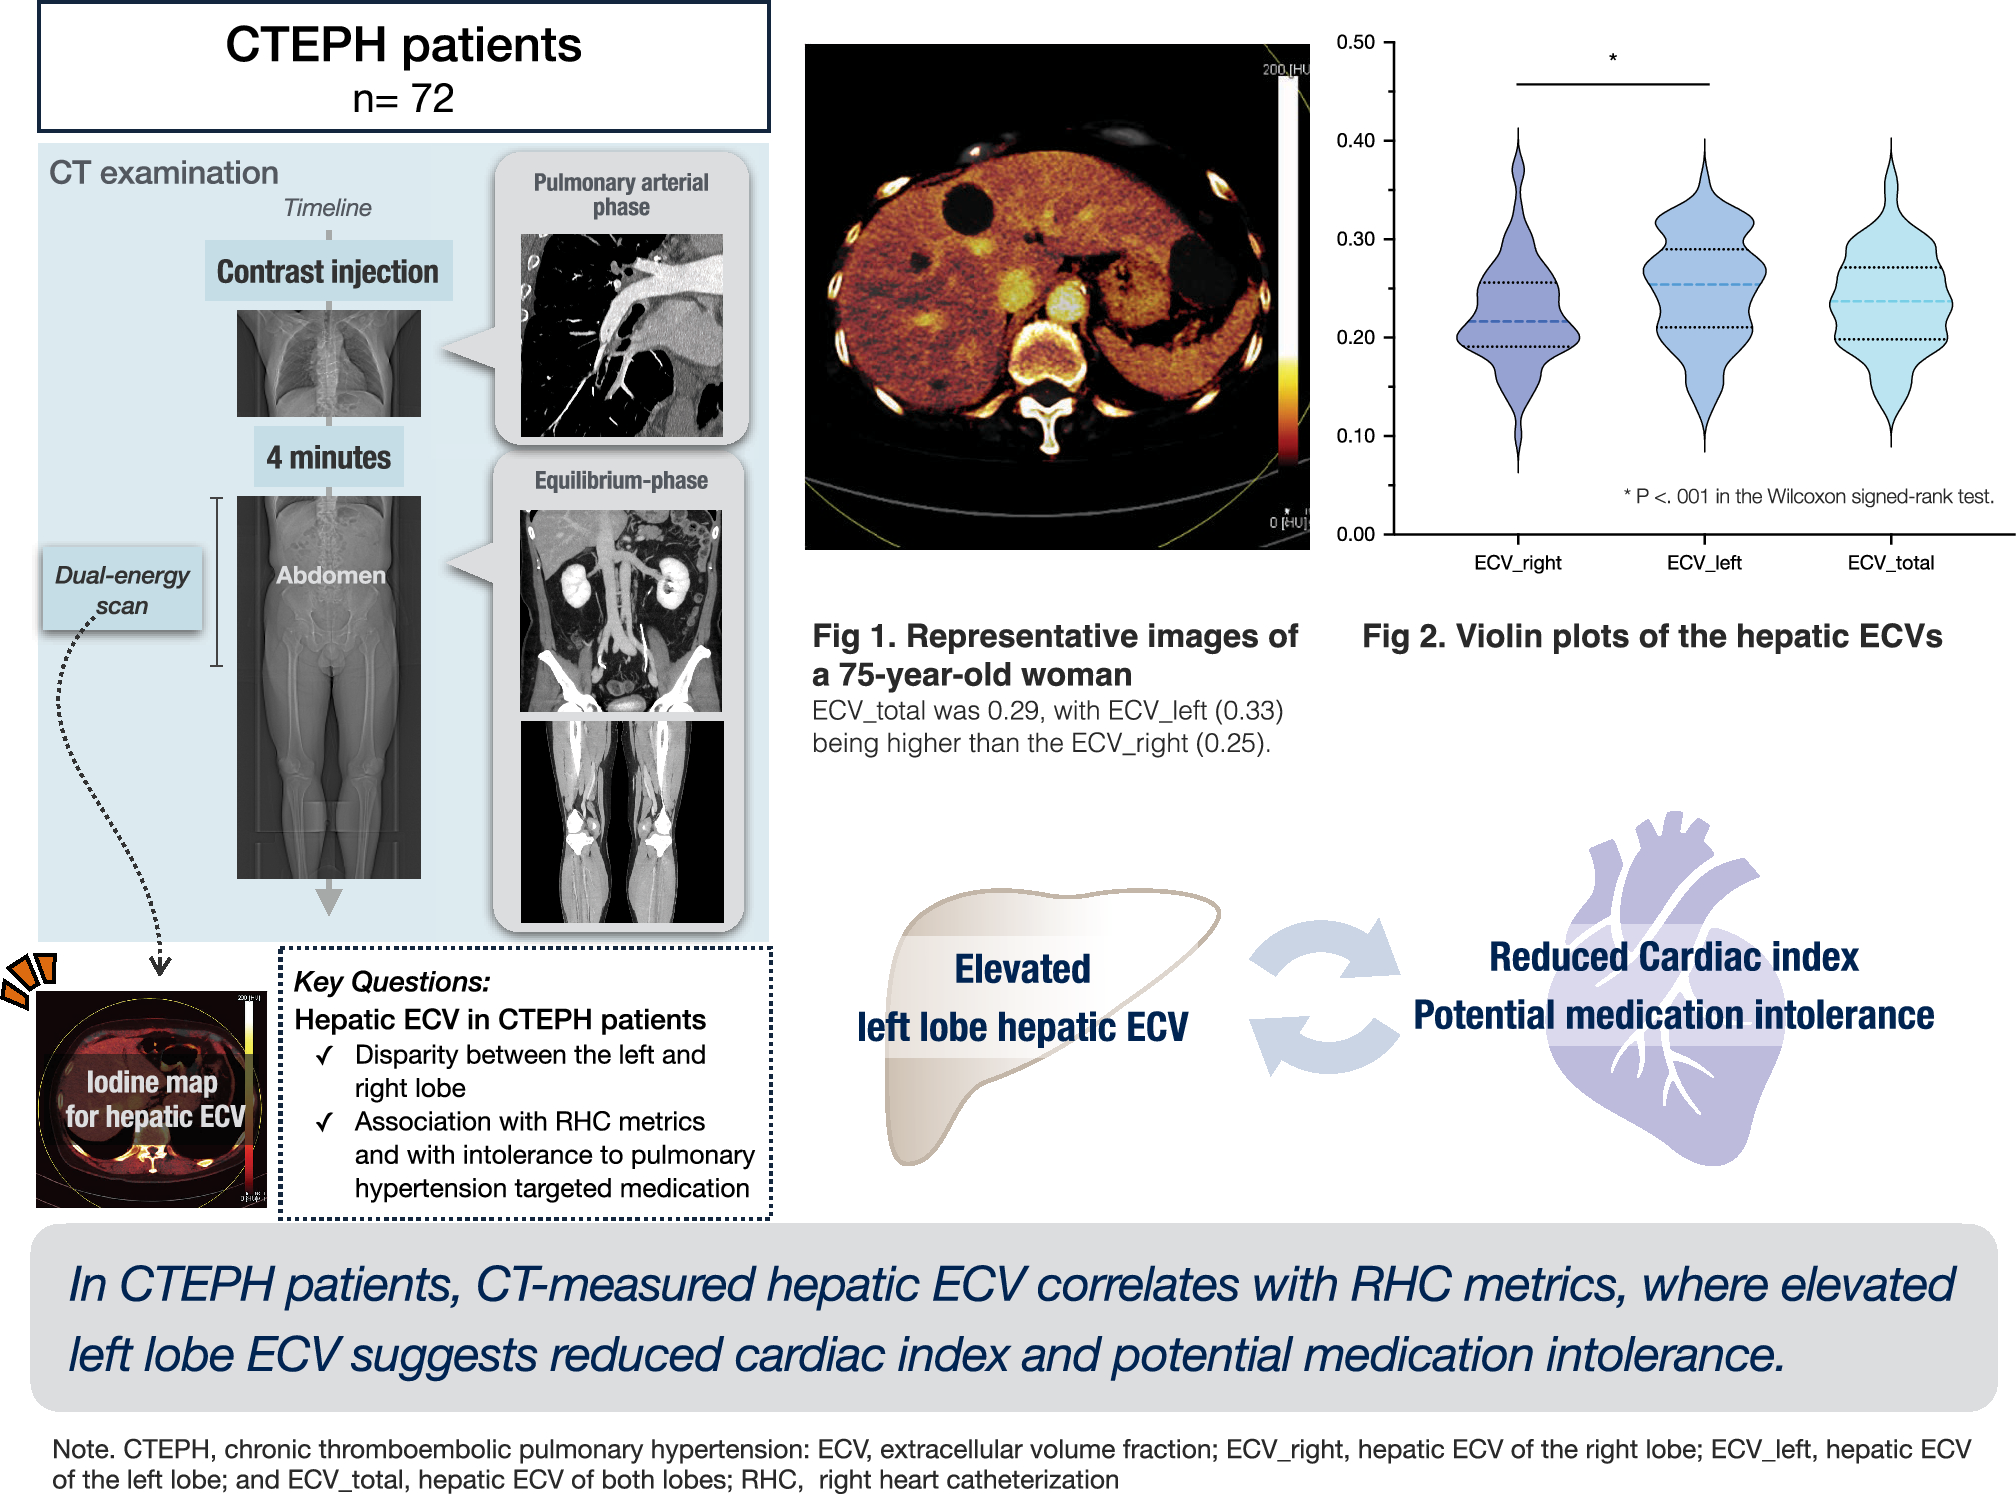 Laterality of CT-measured hepatic extracellular volume fraction in patients with chronic thromboembolic pulmonary hypertension